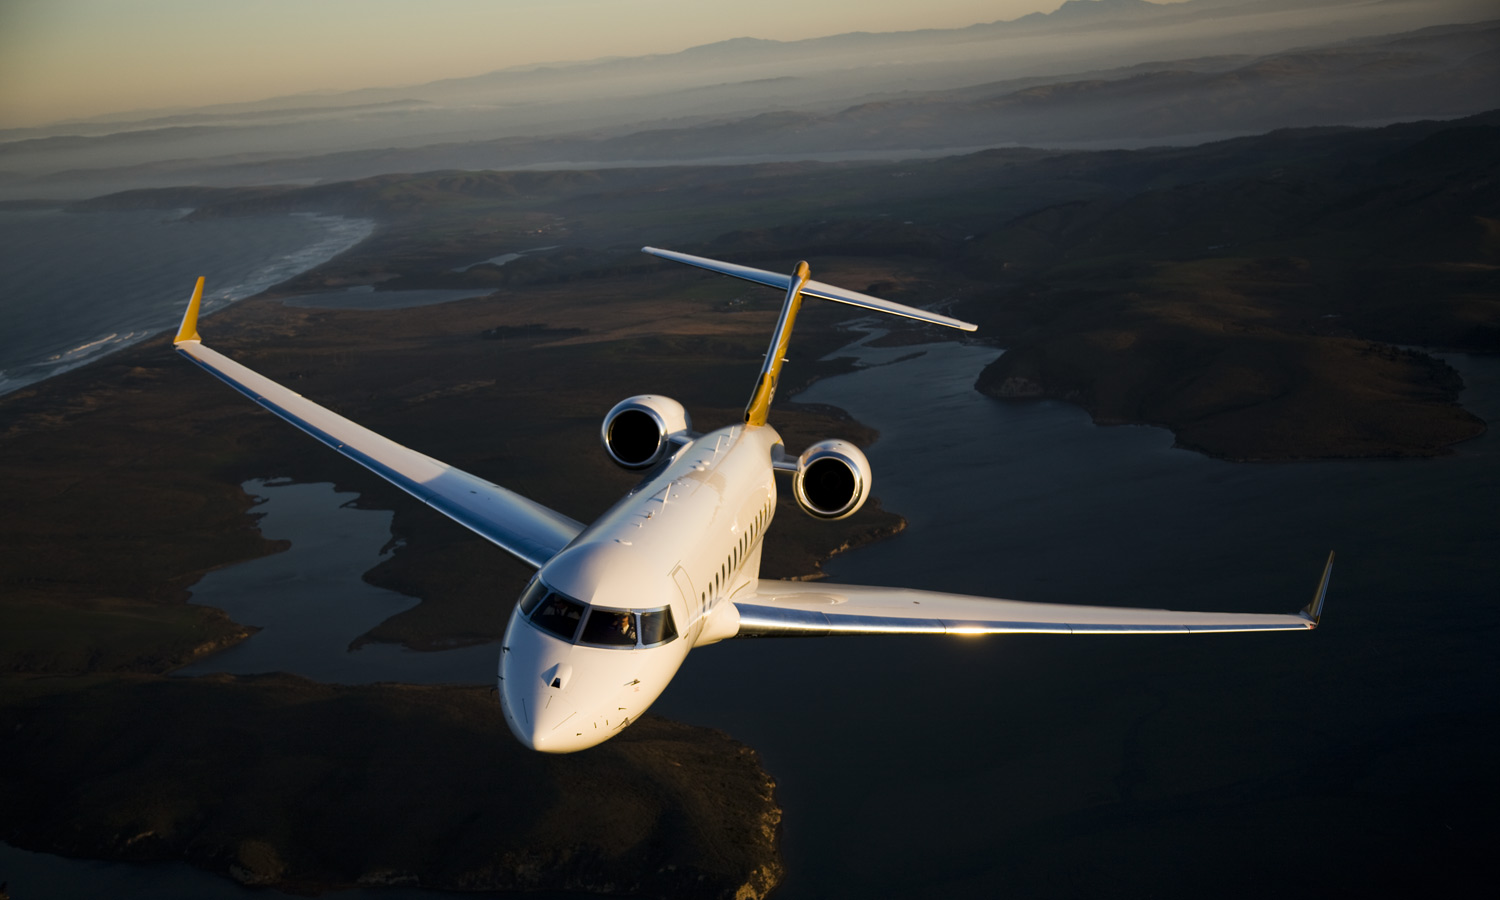  2016 BOMBARDIER GLOBAL 6000 FOR SALE